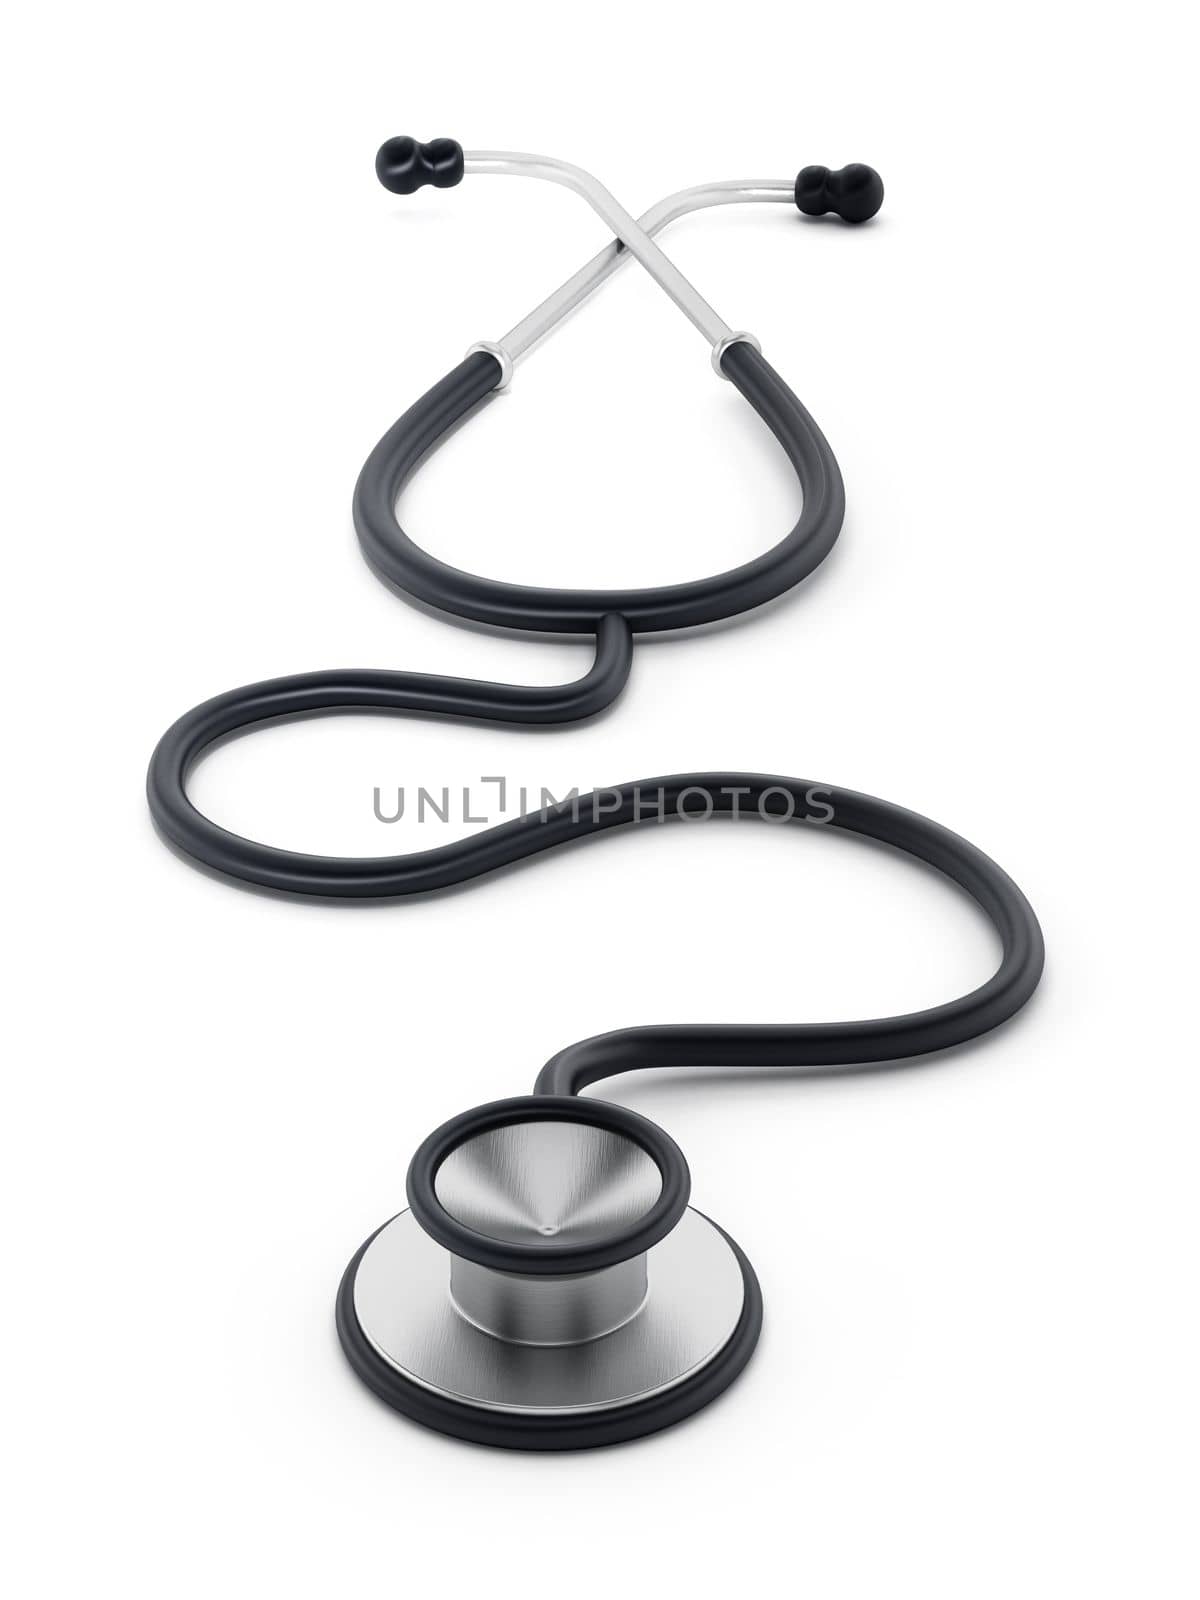 Stethoscope standing on white surface. 3D illustration by Simsek